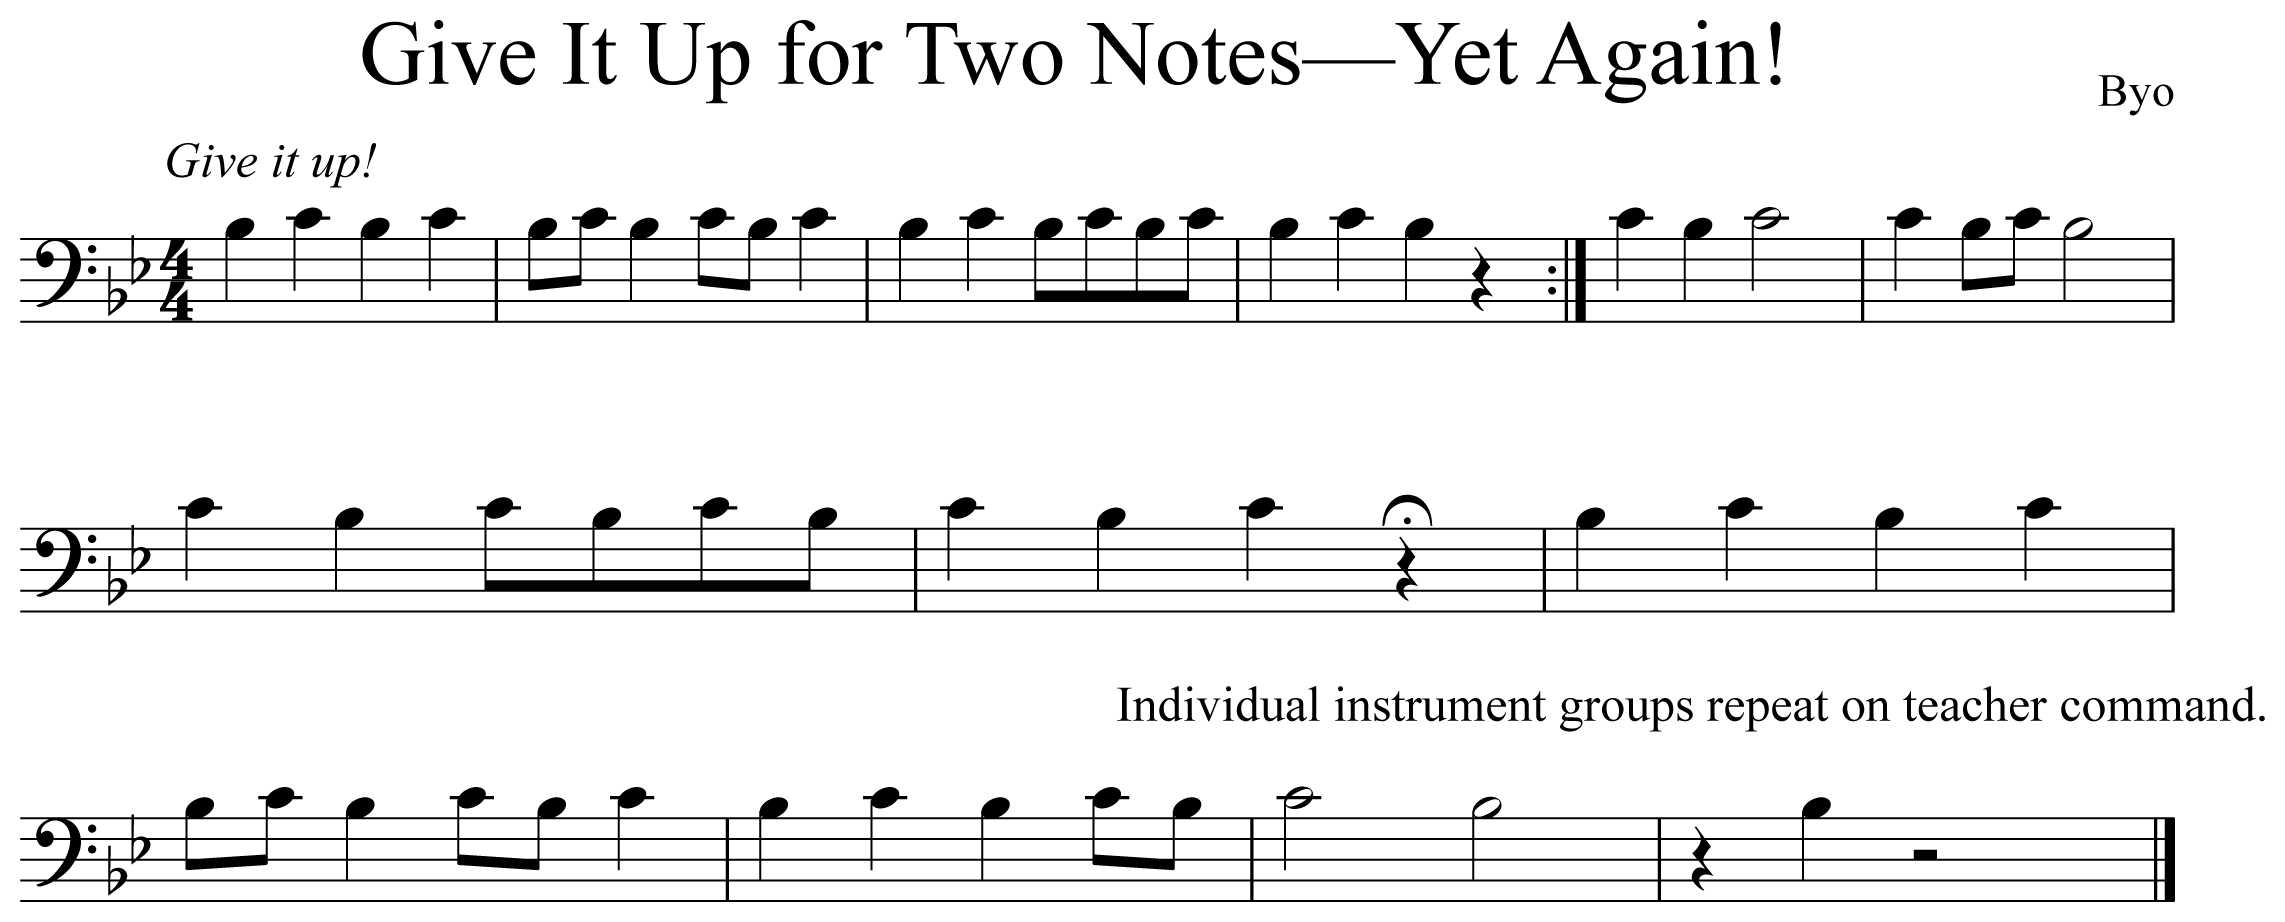 Give it up for Two Notes Yet Again Notation Euphonium